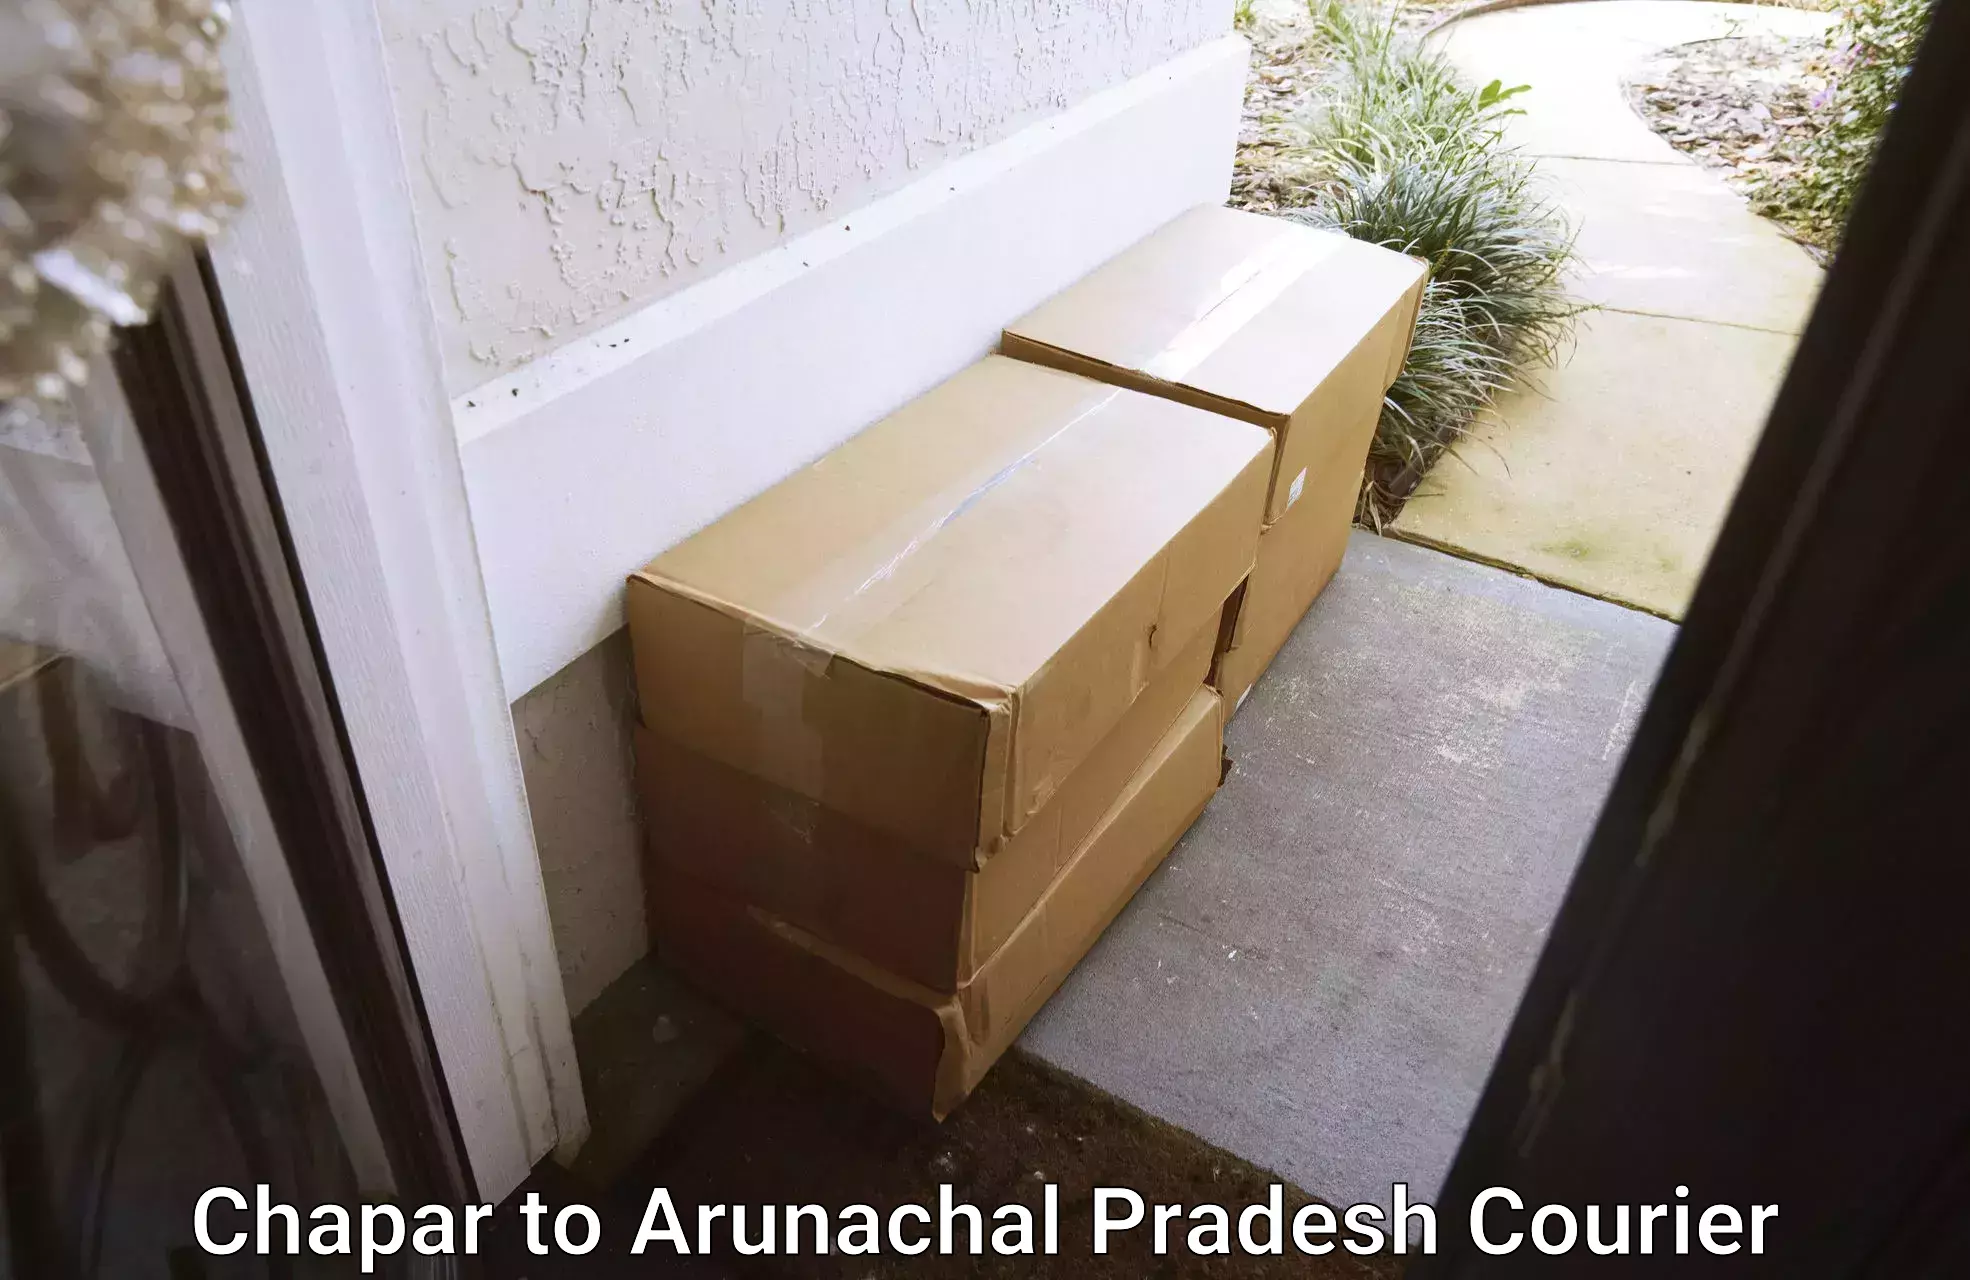 Round-the-clock parcel delivery in Chapar to Khonsa